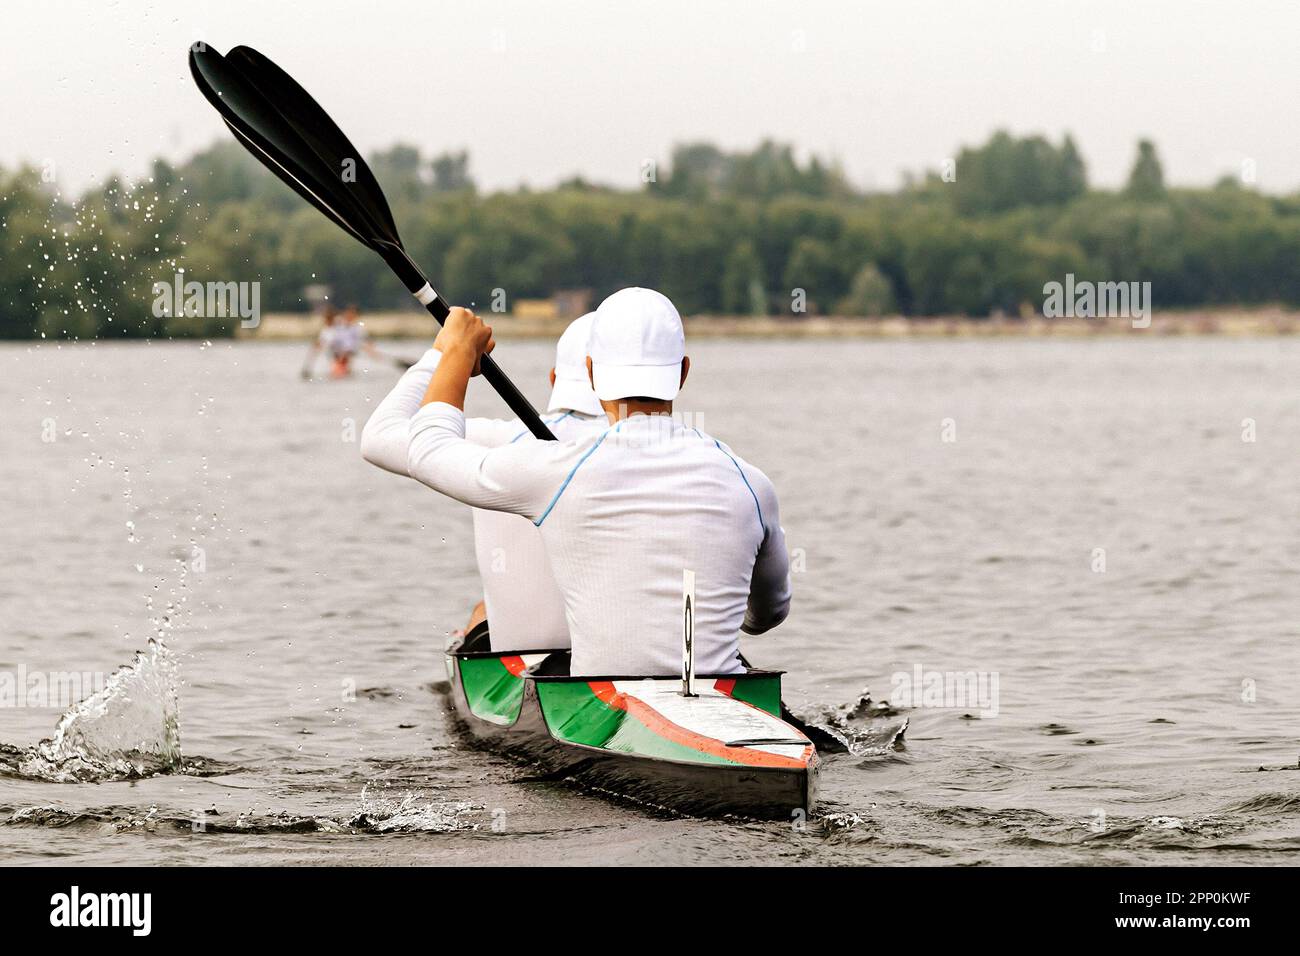 rear view two male kayakers on kayak double in kayaking competition race, sports summer games Stock Photo